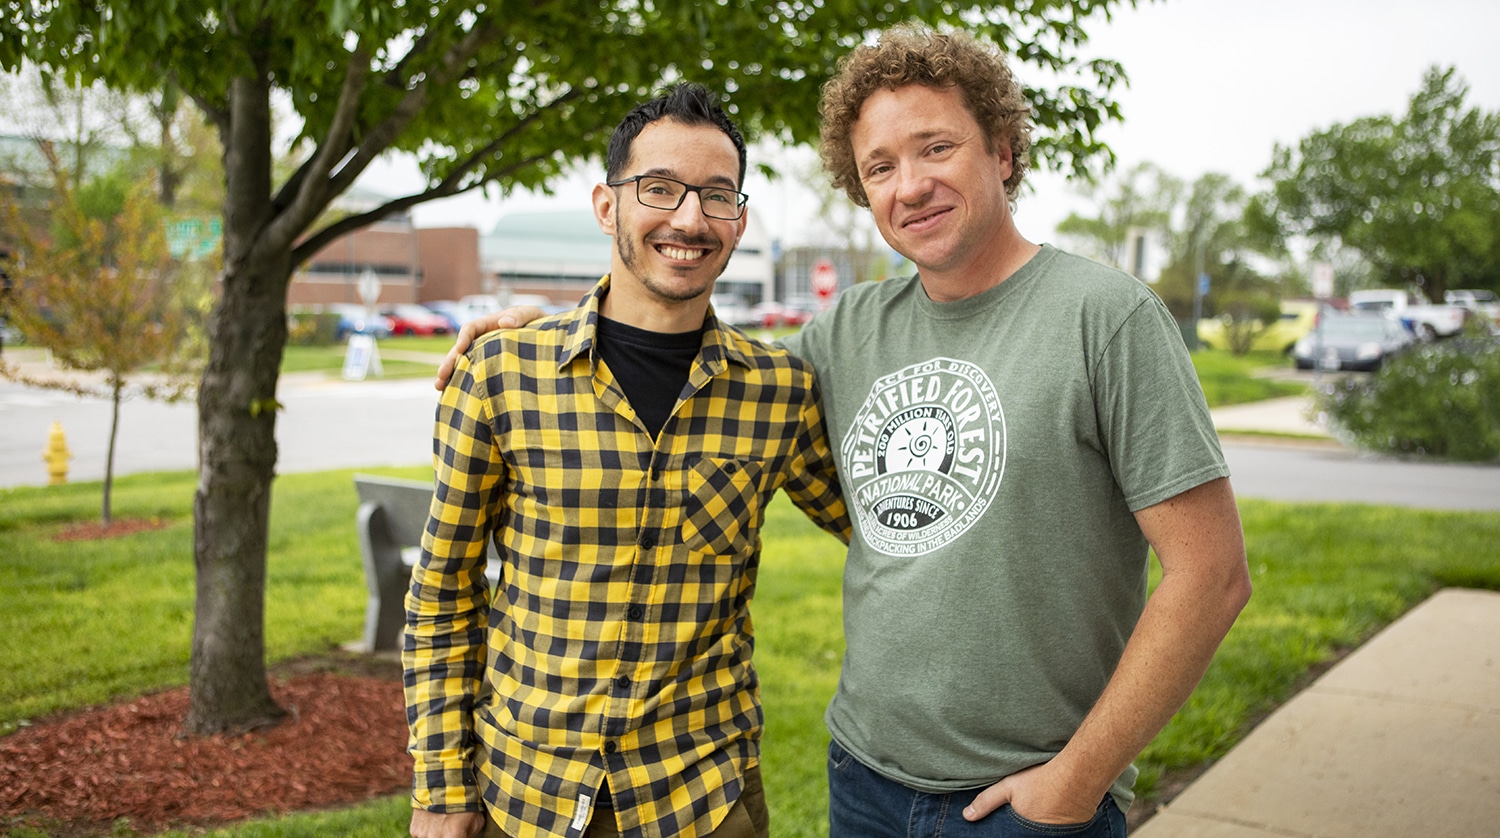 OTC student Anthony Sandoval poses with biology instructor, Mike Martin